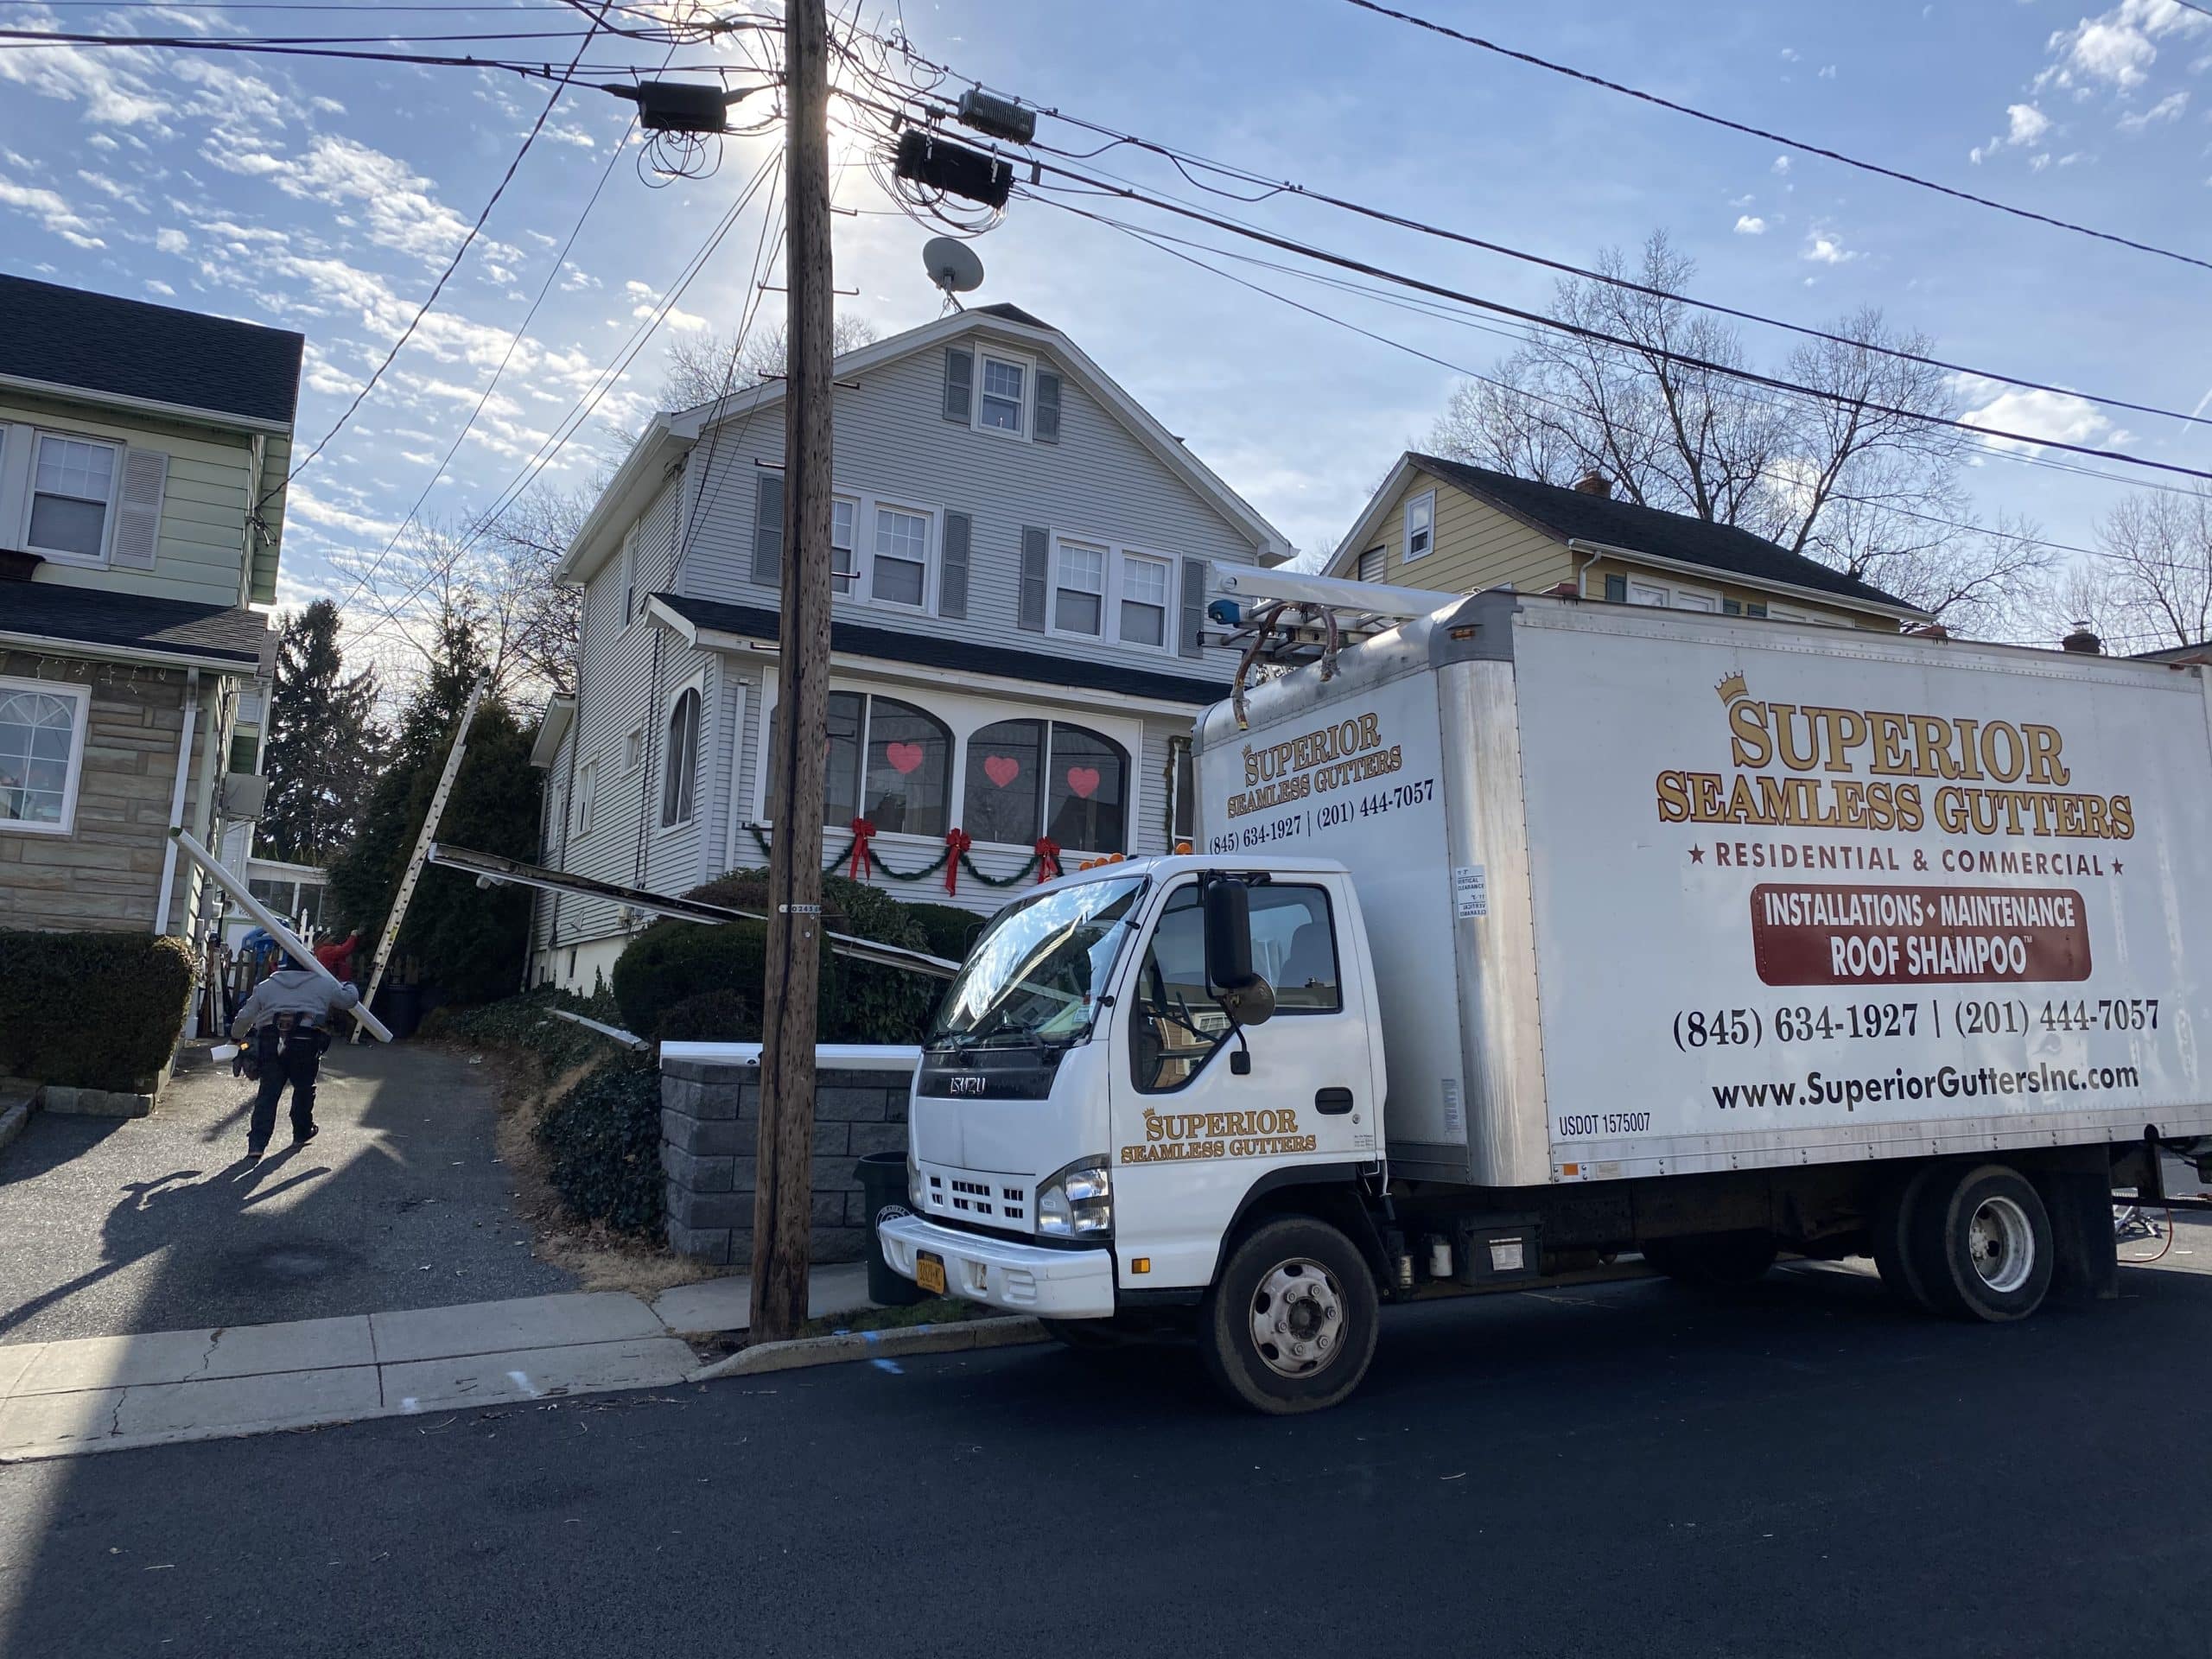 gutters and gutter covers installation in oradell nj by superior seamless gutters